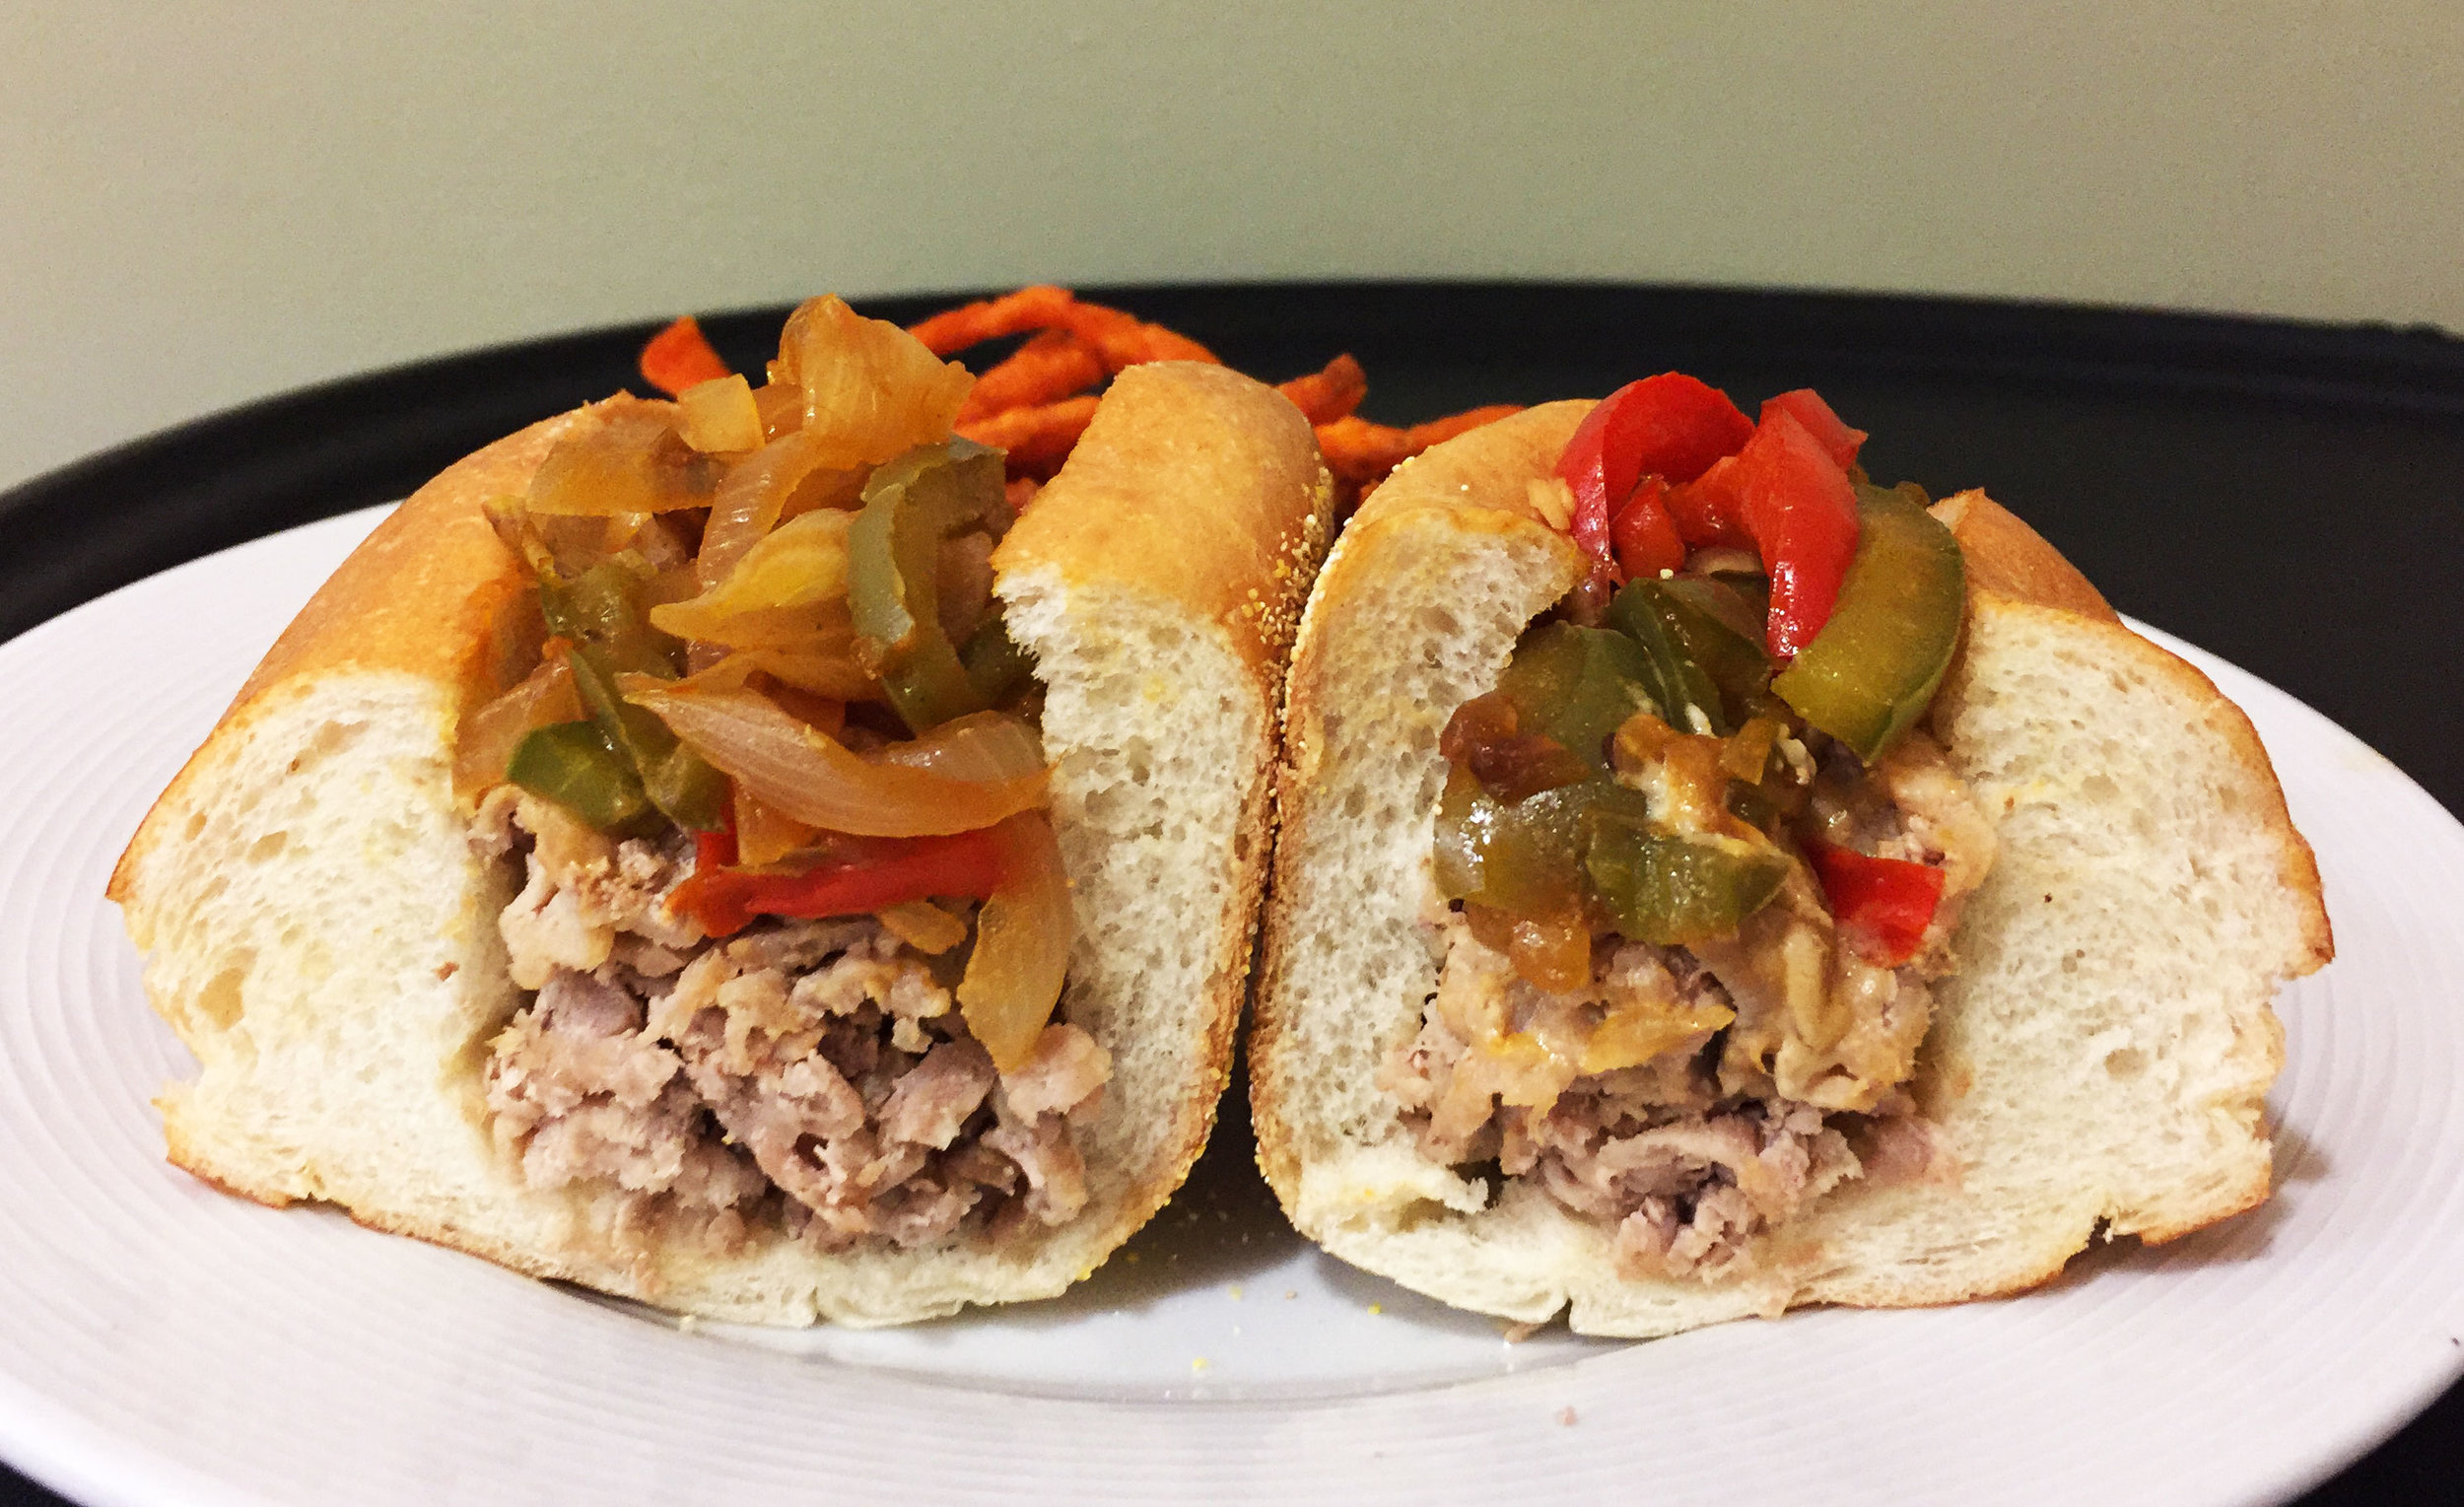 Shaved veal steak sandwich with sautéed peppers and onions